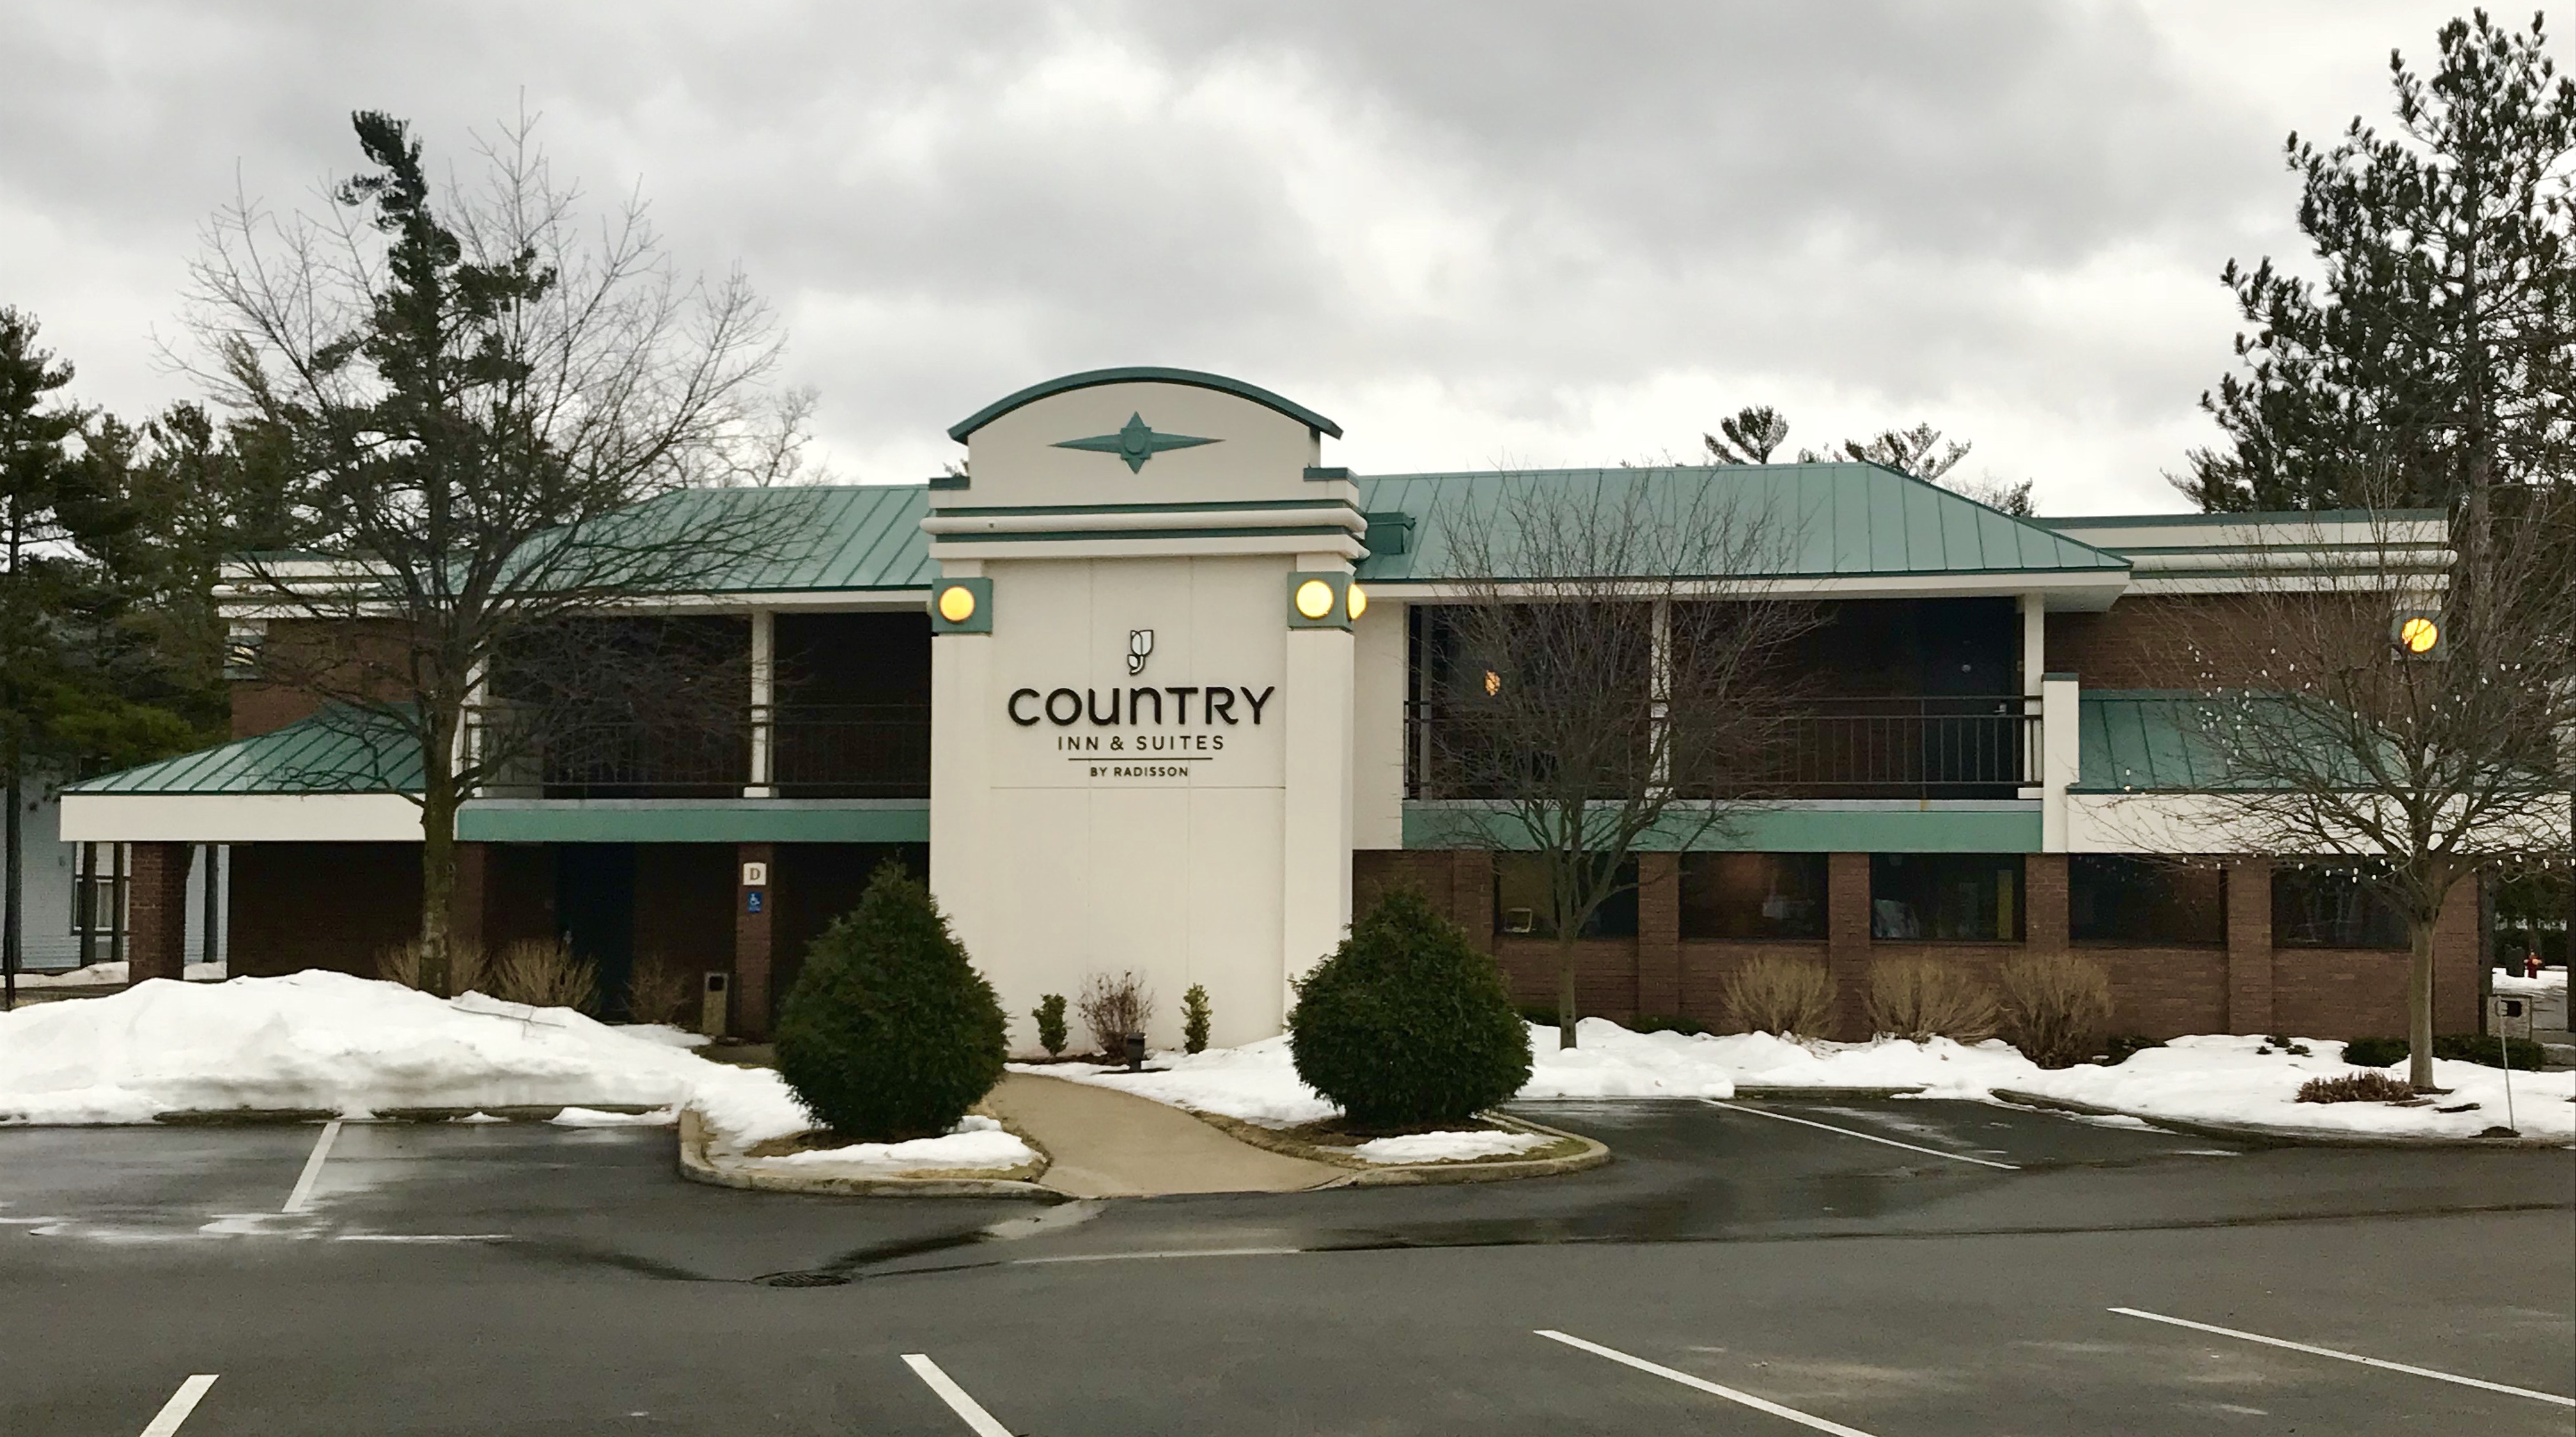 Country Inn Suites